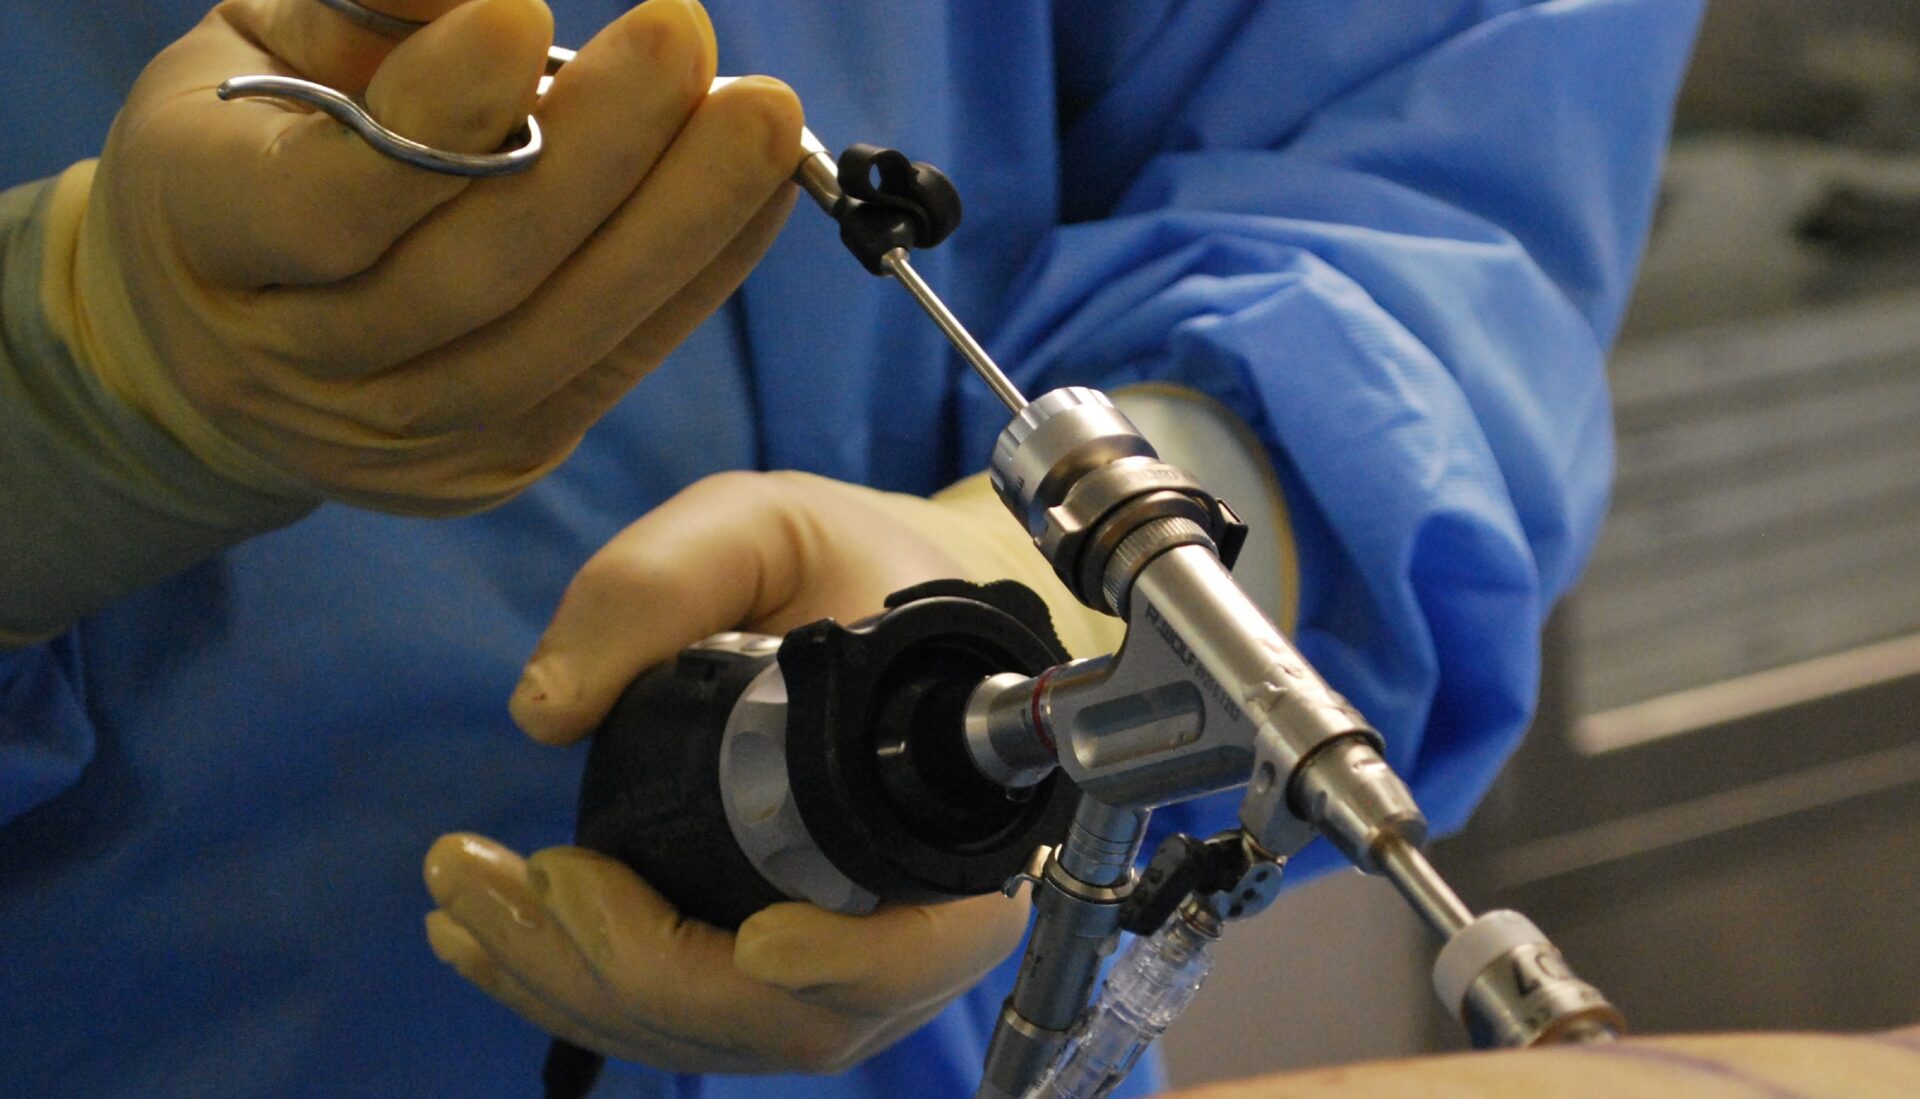 MicroEndoscopic Discectomy (MED) Endoscopic System Market